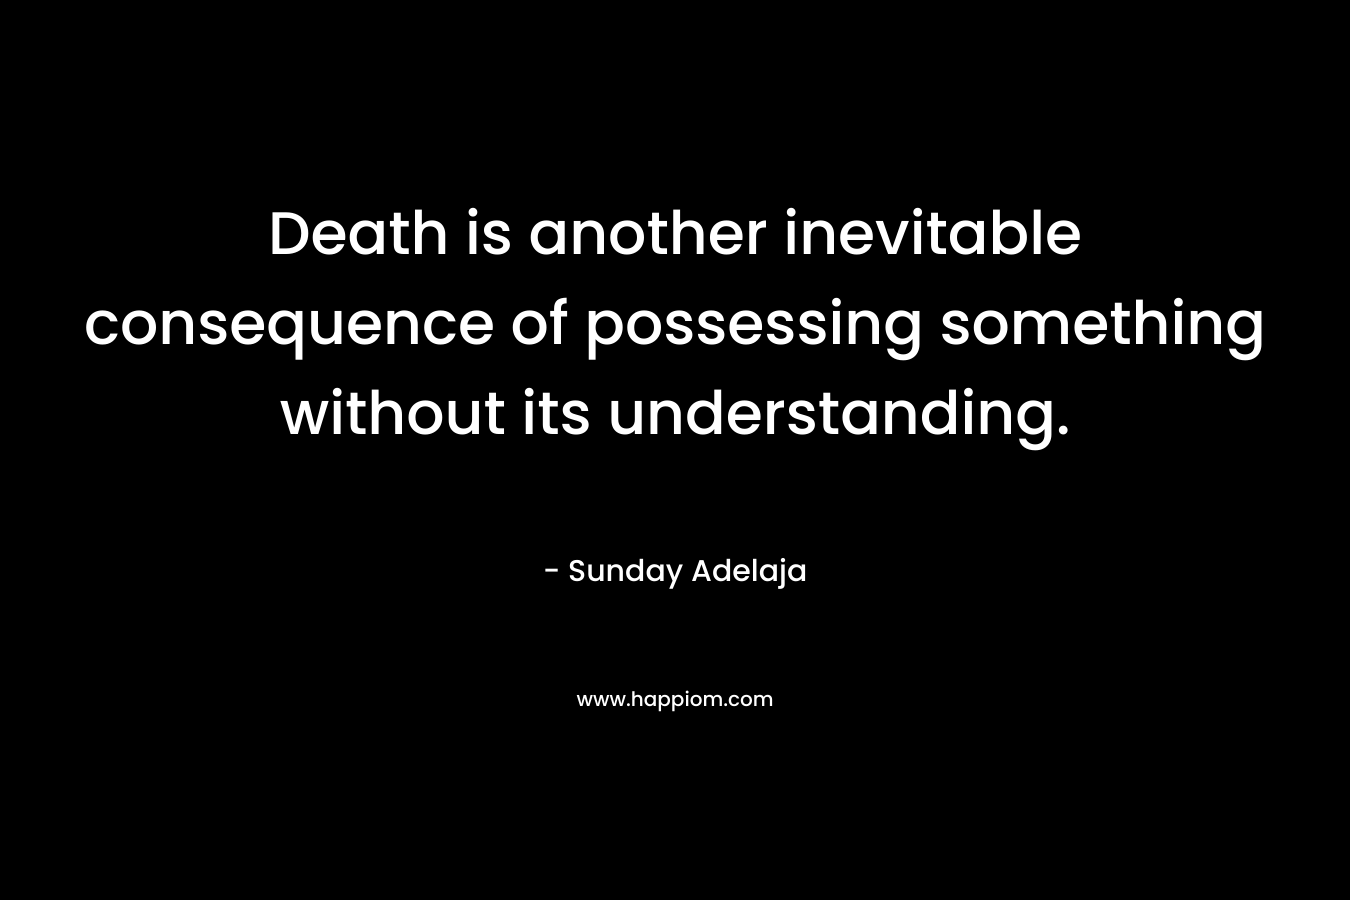 Death is another inevitable consequence of possessing something without its understanding. – Sunday Adelaja